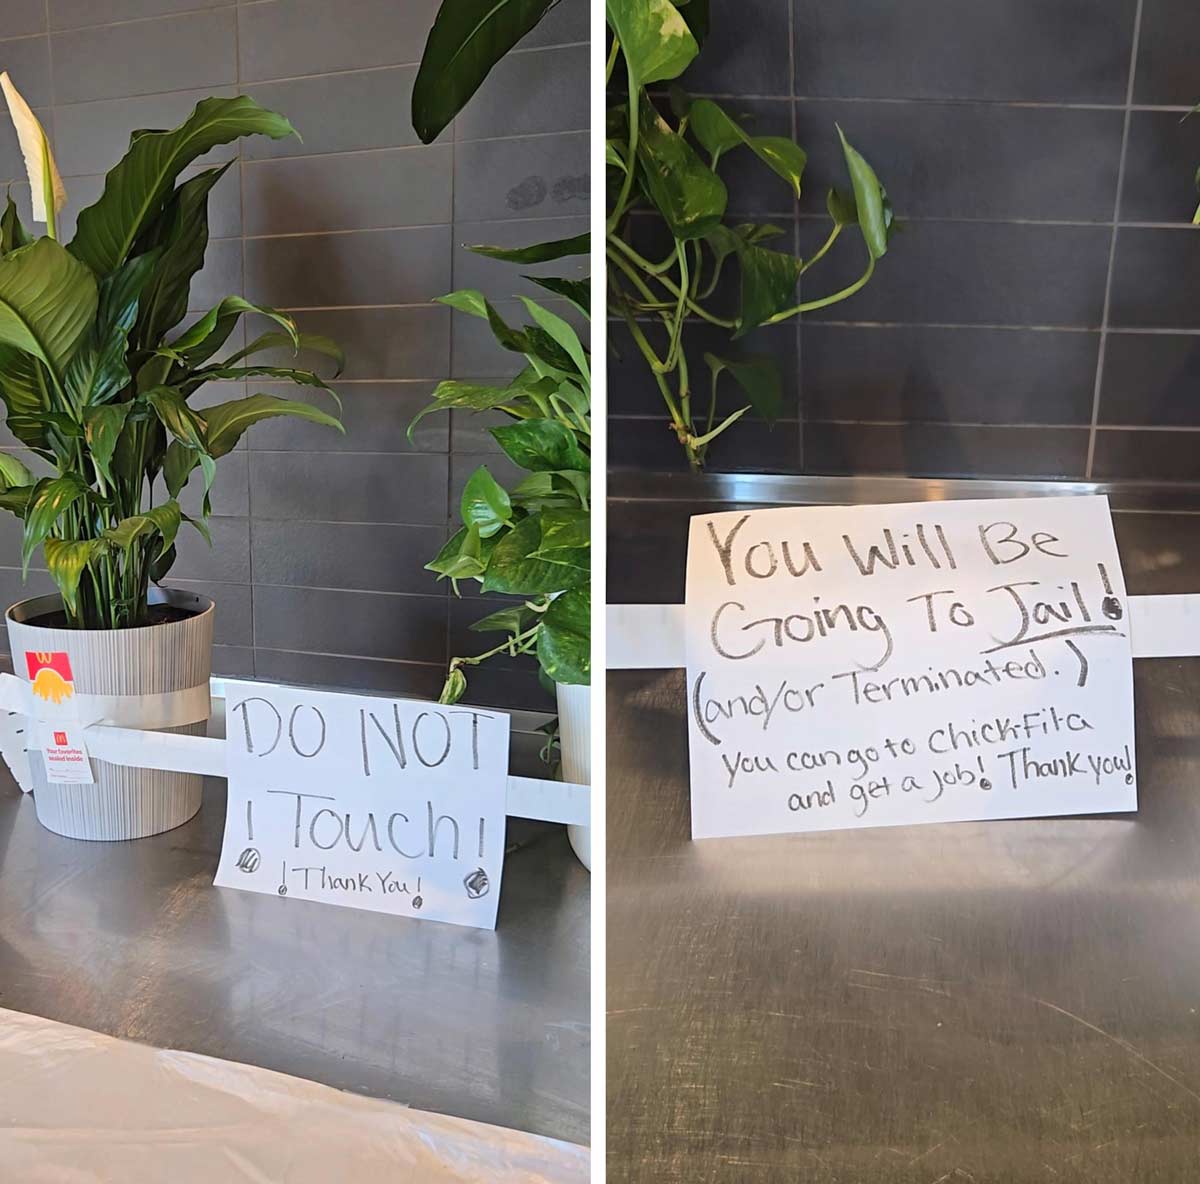 McDonald's isn't playing, "Yes, 911, someone touched my plant!"